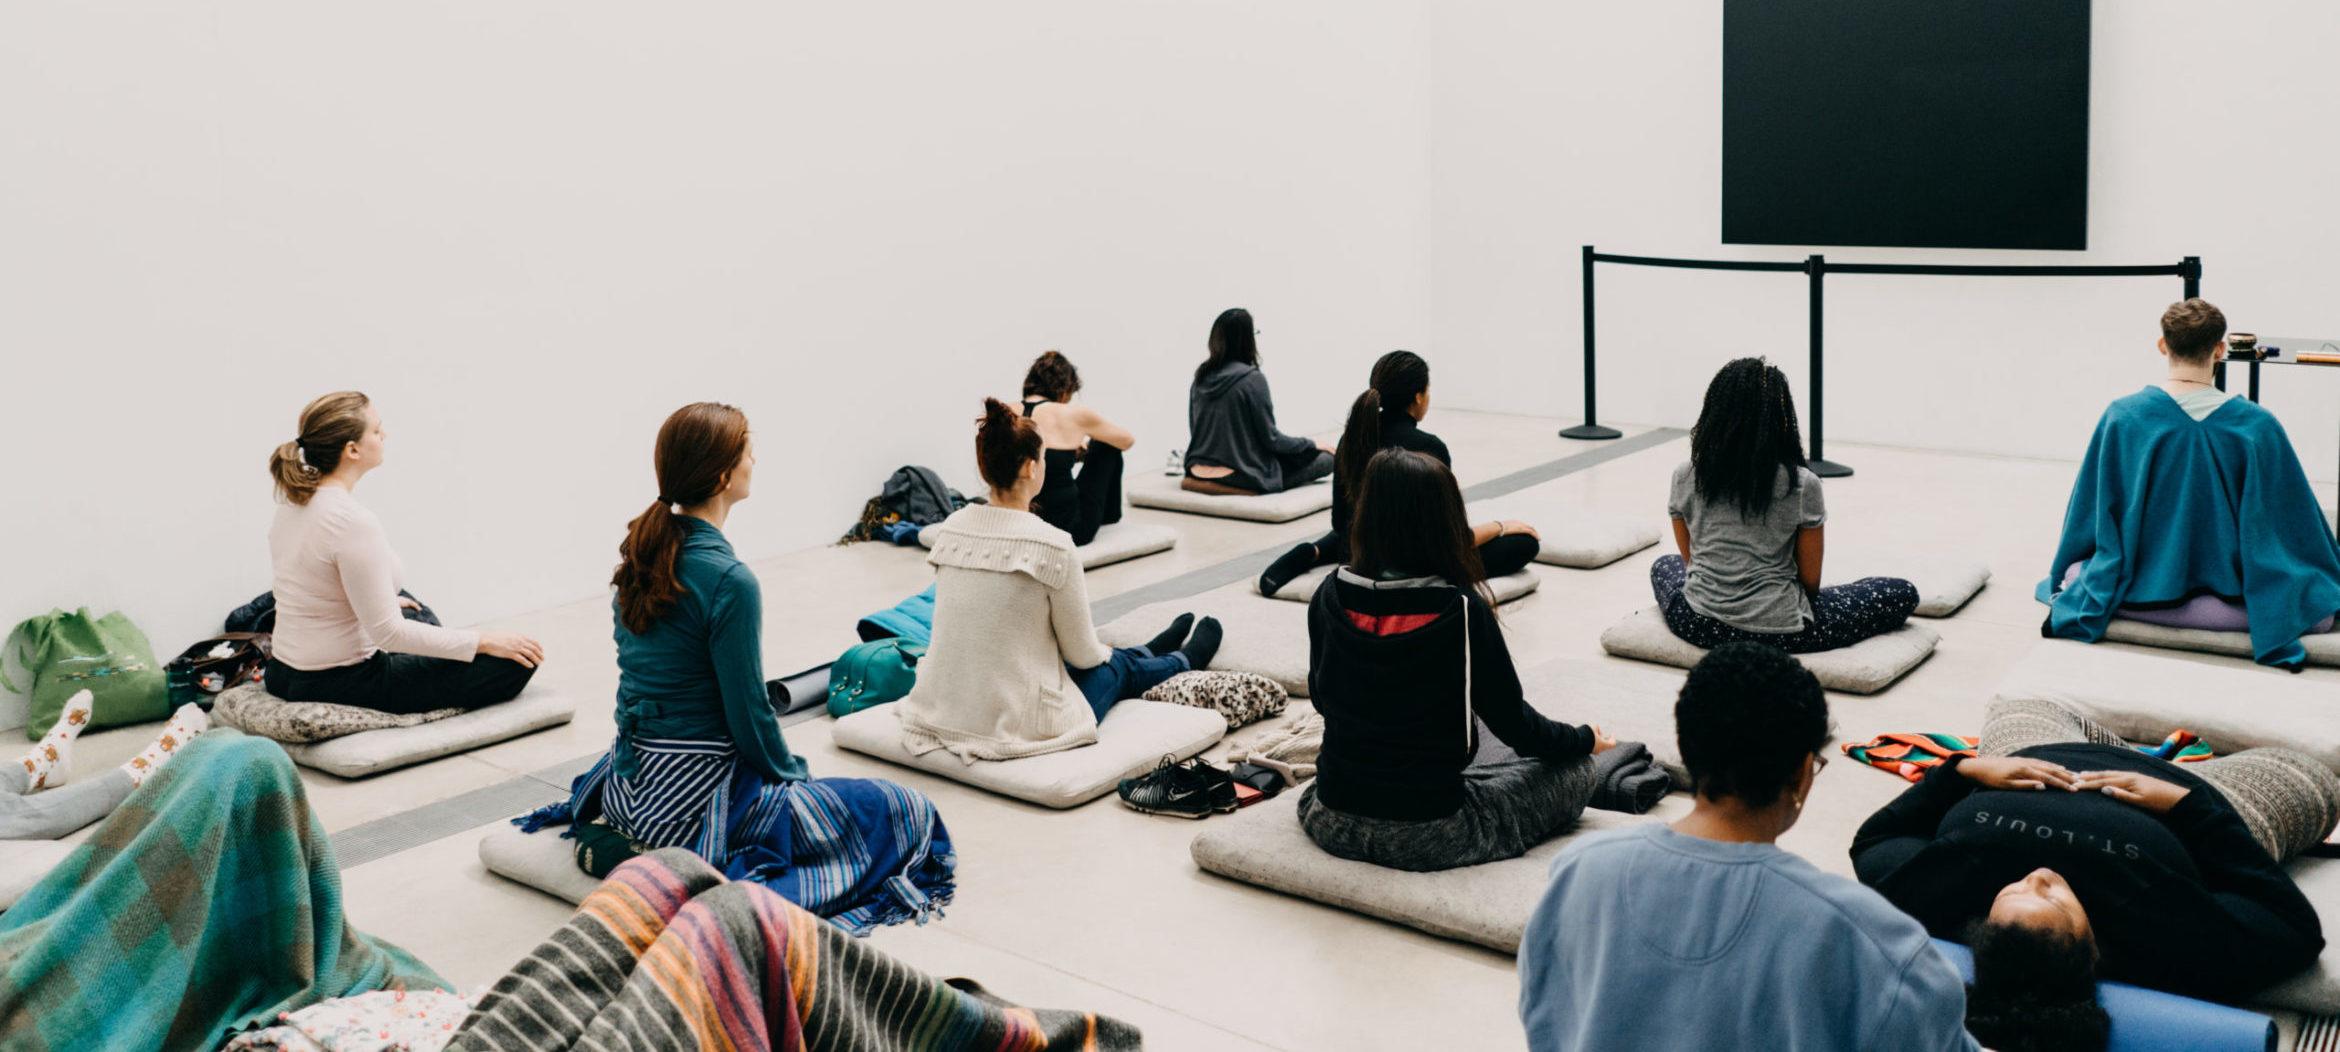 People participating in sound healing meditation at the Pulitzer Arts Foundation